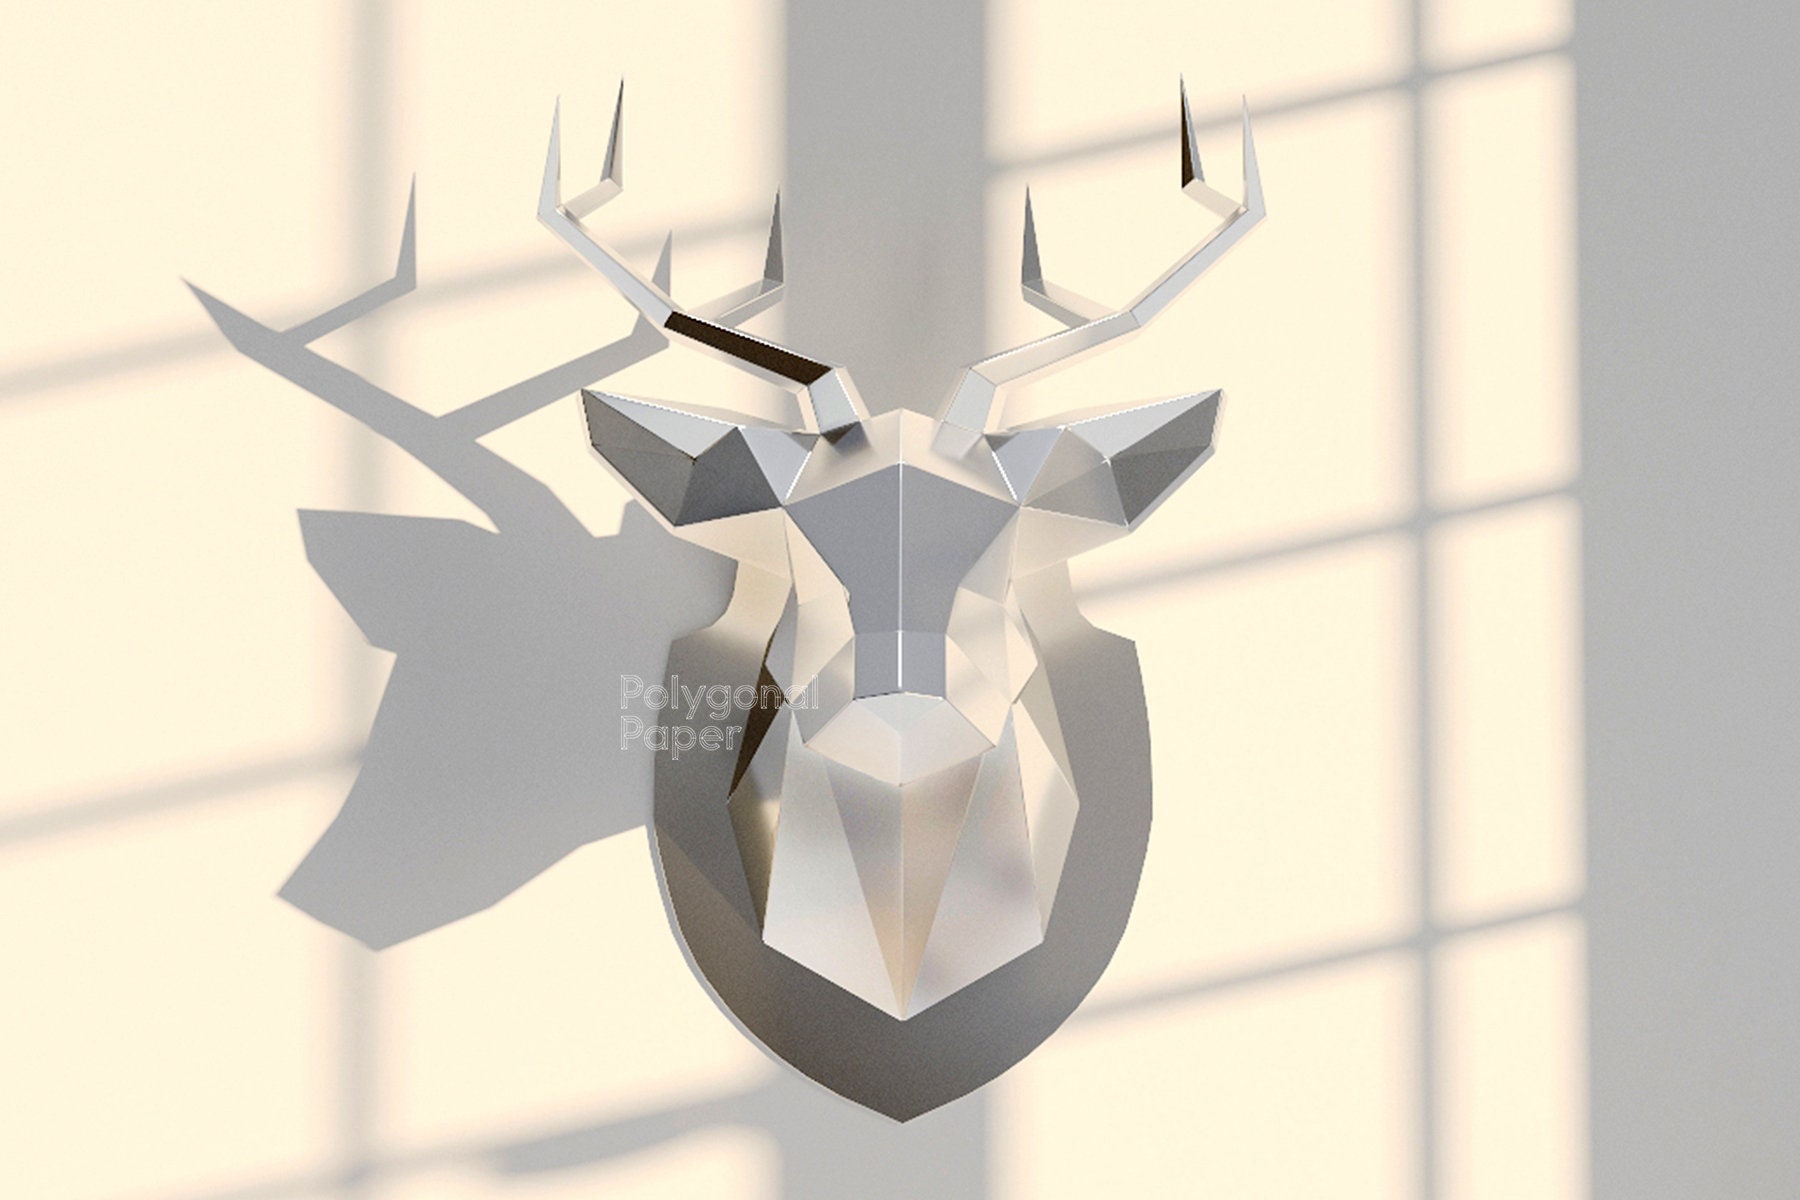 Template for Geometric Polygonal Sculpture 3d constructor Unicorn Head in DXF and PDF Format for Assembly from Sheet Metal